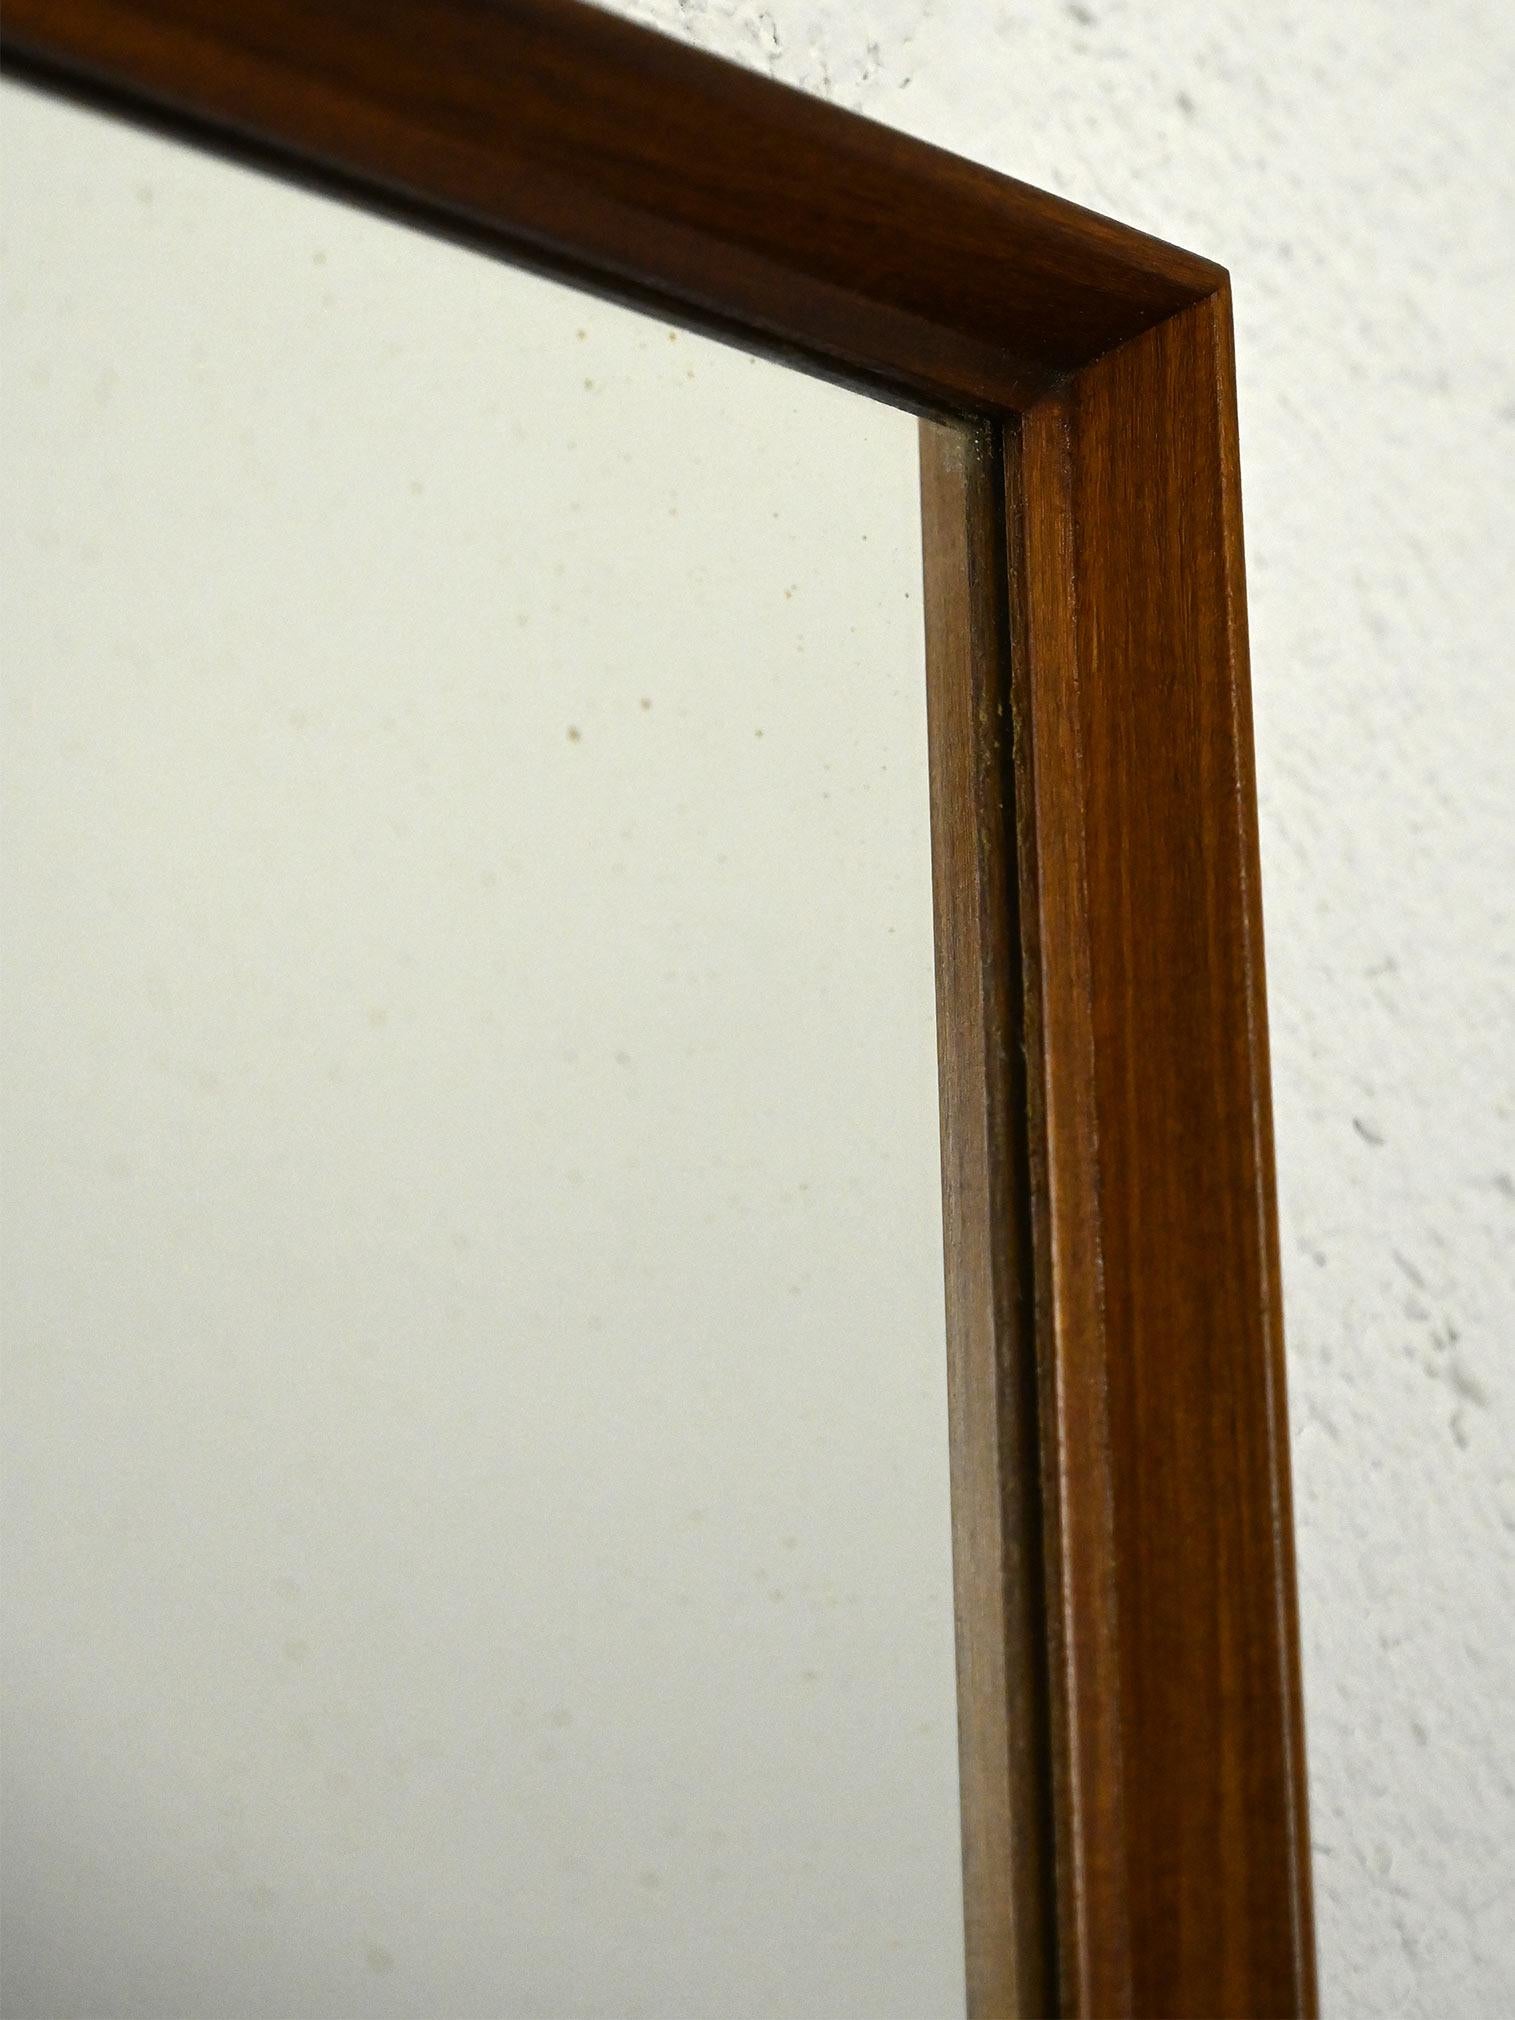 Scandinavian teak wood mirror.

Featuring an understated and modern design, this teak wood mirror features clean, minimalist lines. Its square, rectangular shape makes it ideal as a wall mirror, perfect for enhancing the entryway or bedroom. The